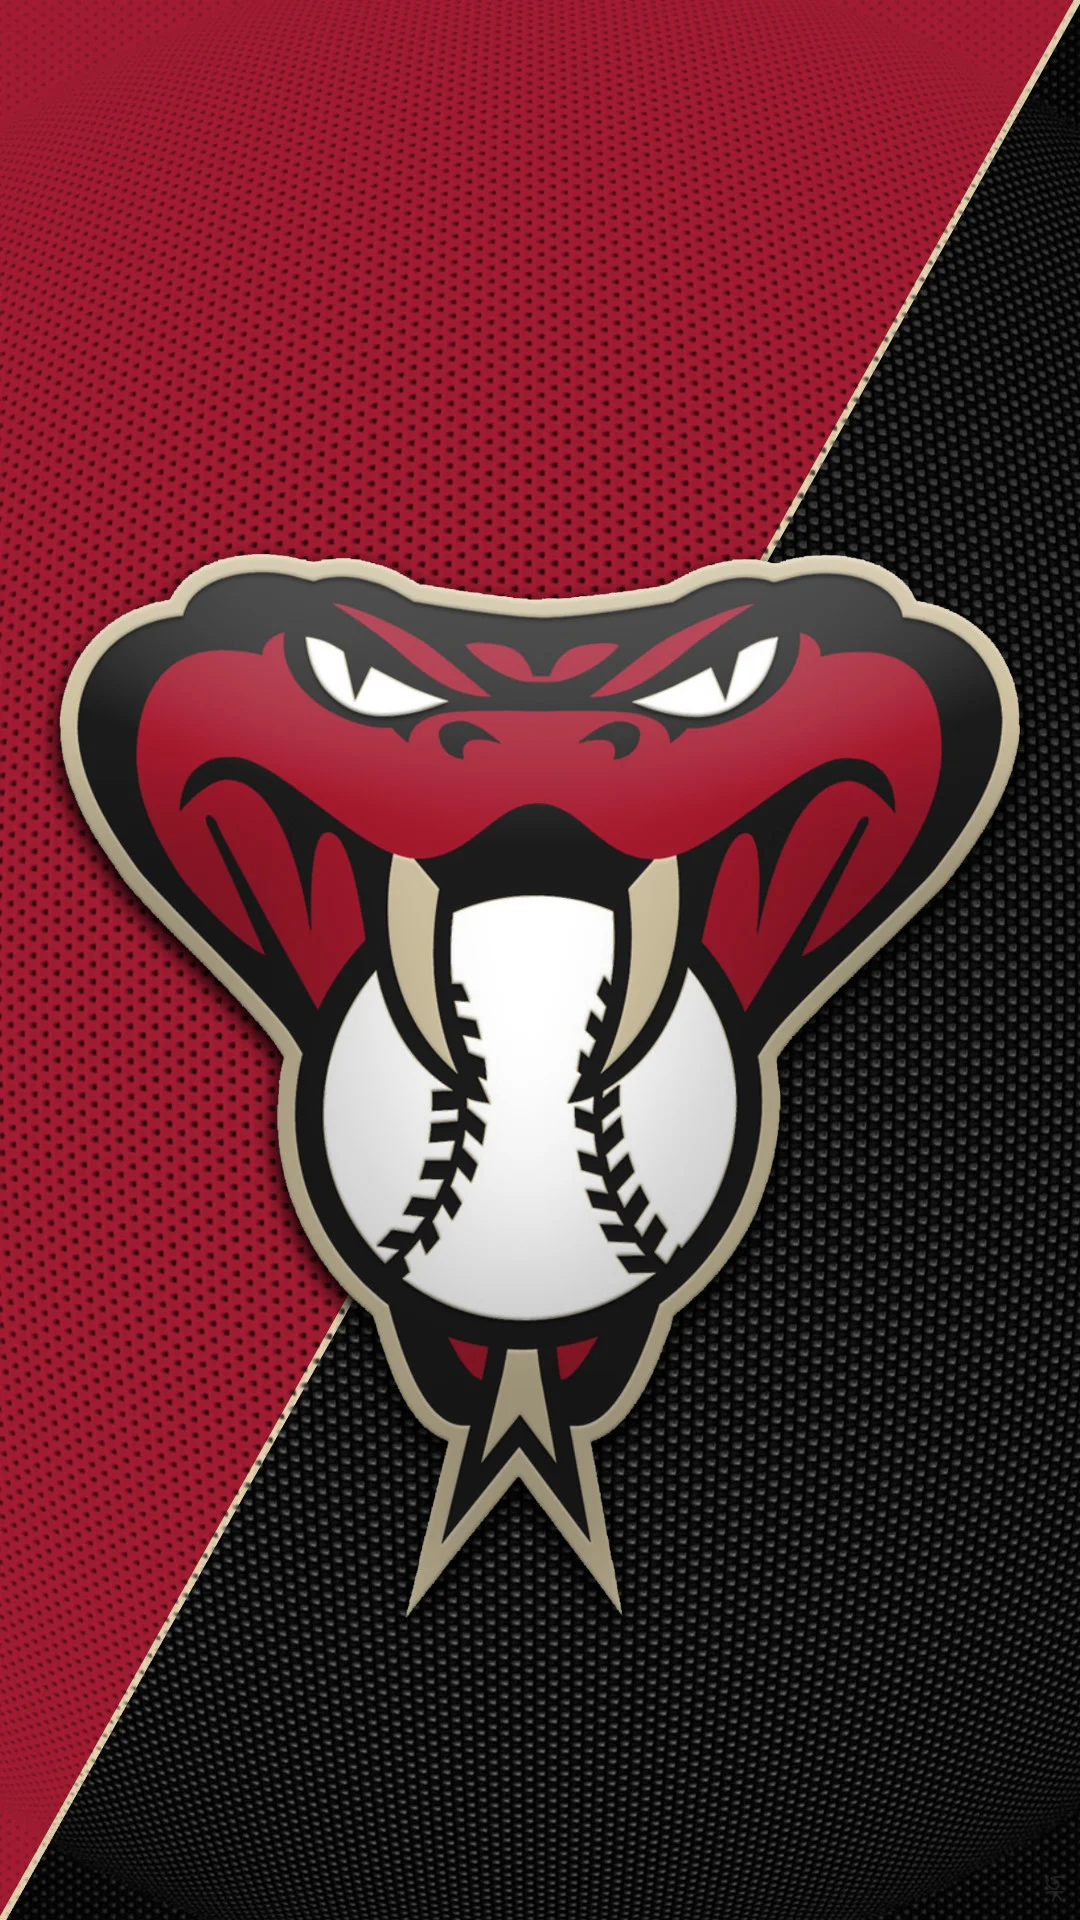 Hey Tigger can you make another Arizona Diamondbacks snakehead logo  wallpaper like you did before for me but in their old school colors of  copper/ teal …